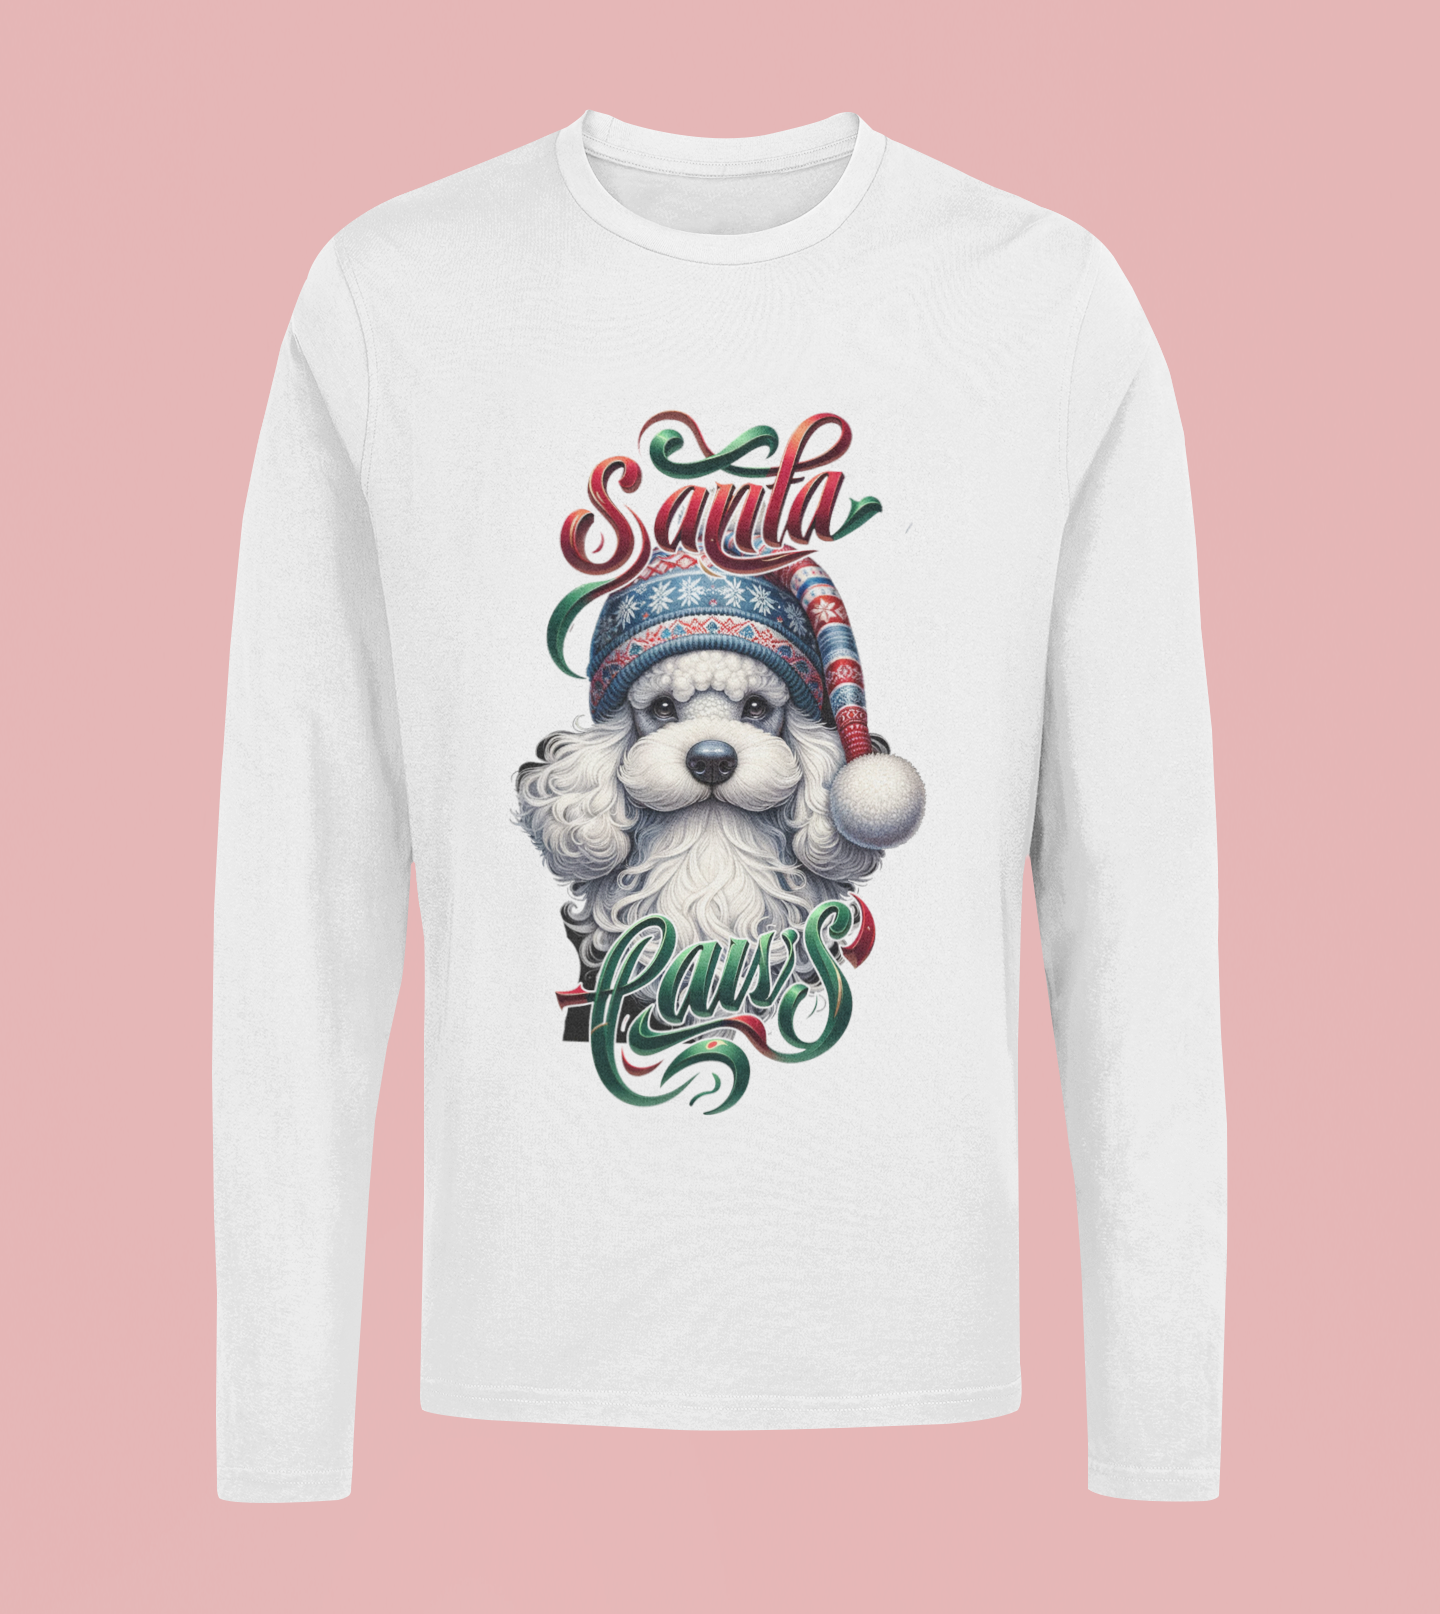 Santa Paws Long Sleeve Tee -Poodle Design - 100% Cotton - USA Made - Holiday Party Favorites